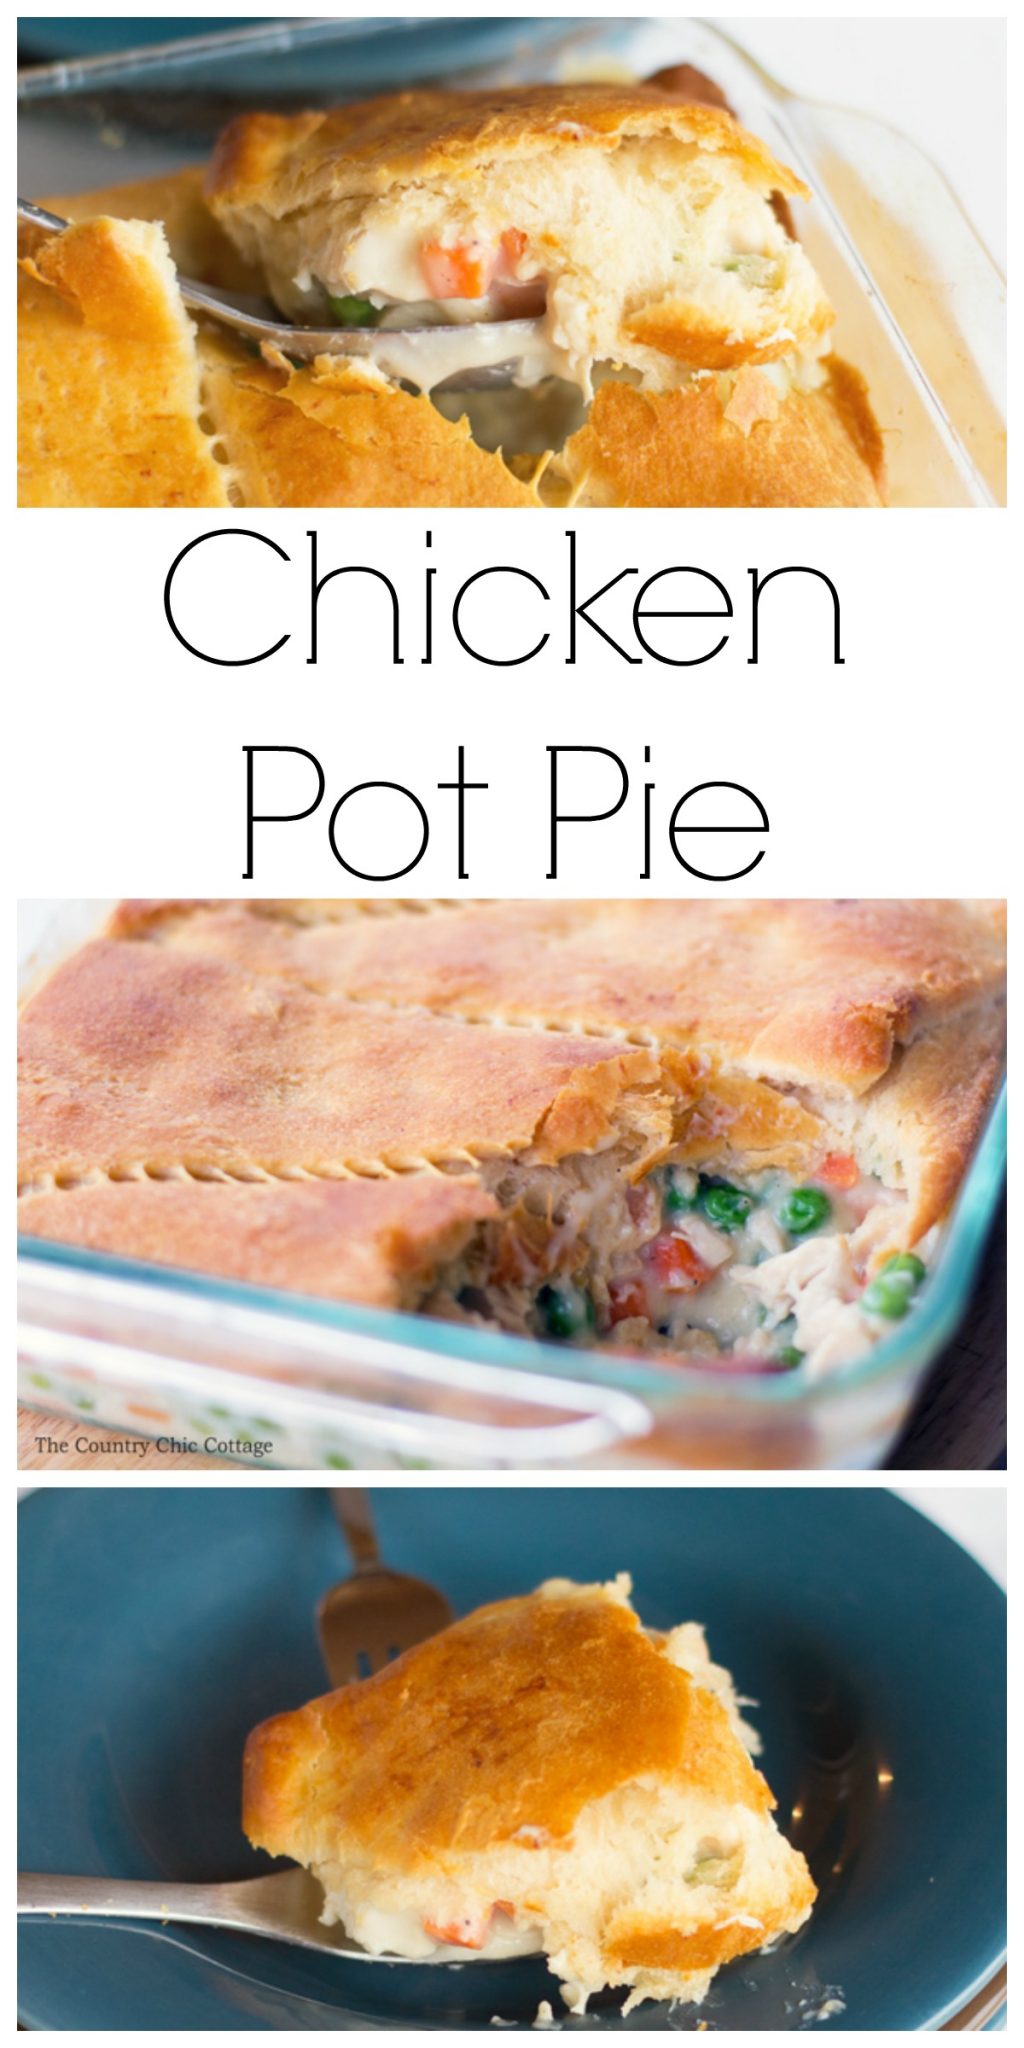 Make this chicken pot pie recipe for your family! This quick and easy version is ready in 30 minutes or less!